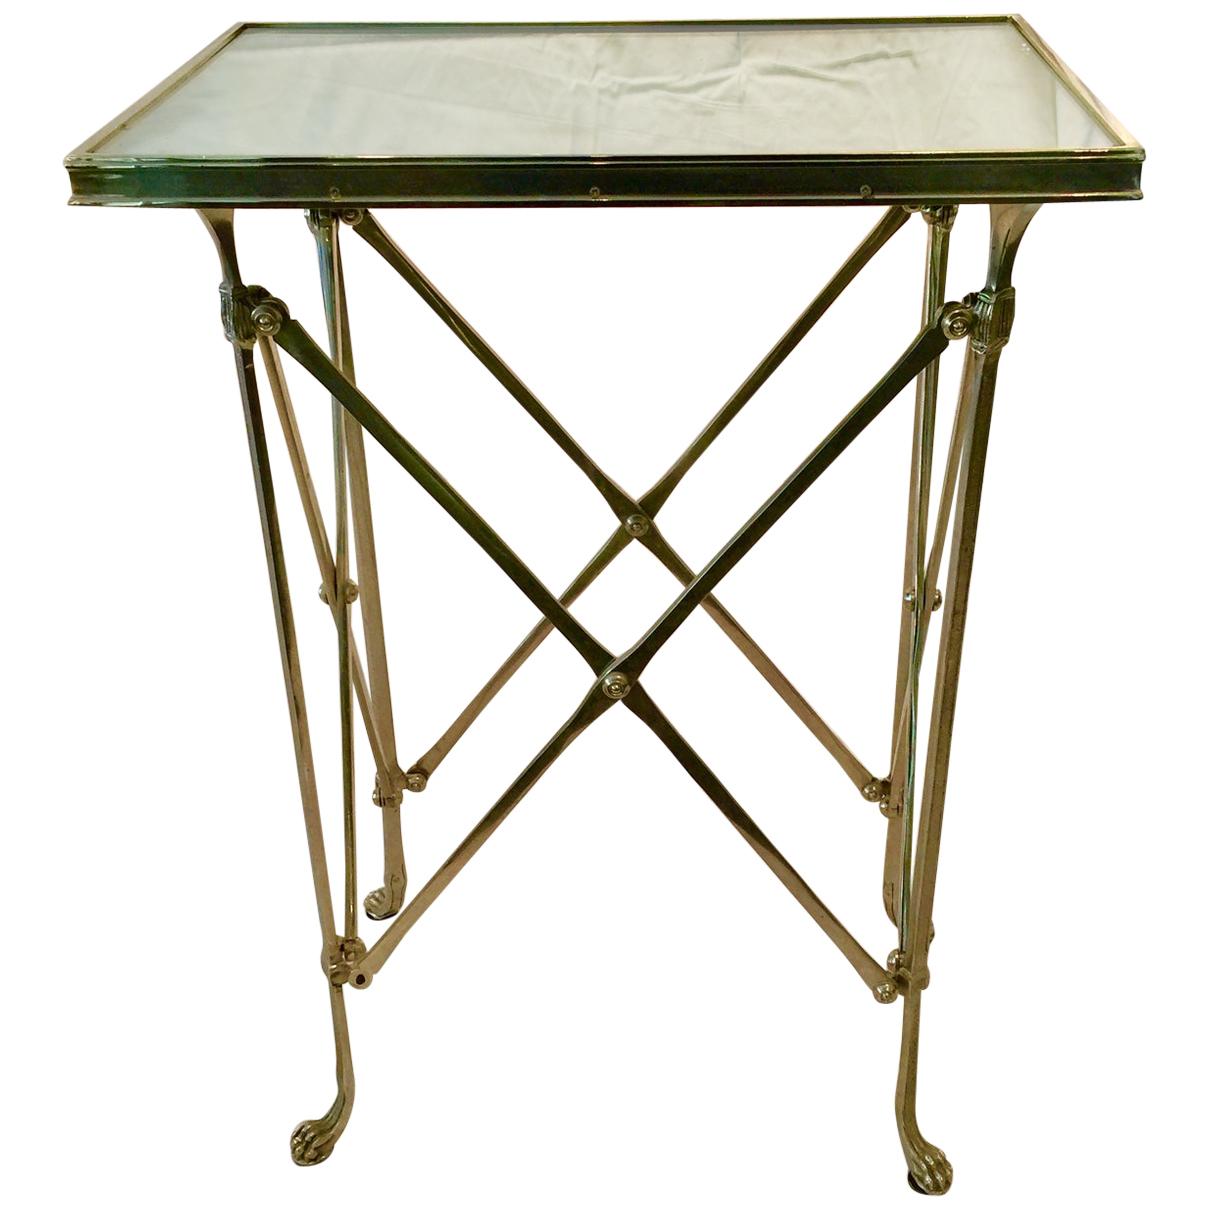 Neoclassical Empire Style Rectangular Gueridon Table, Nickeled with Mirror Top